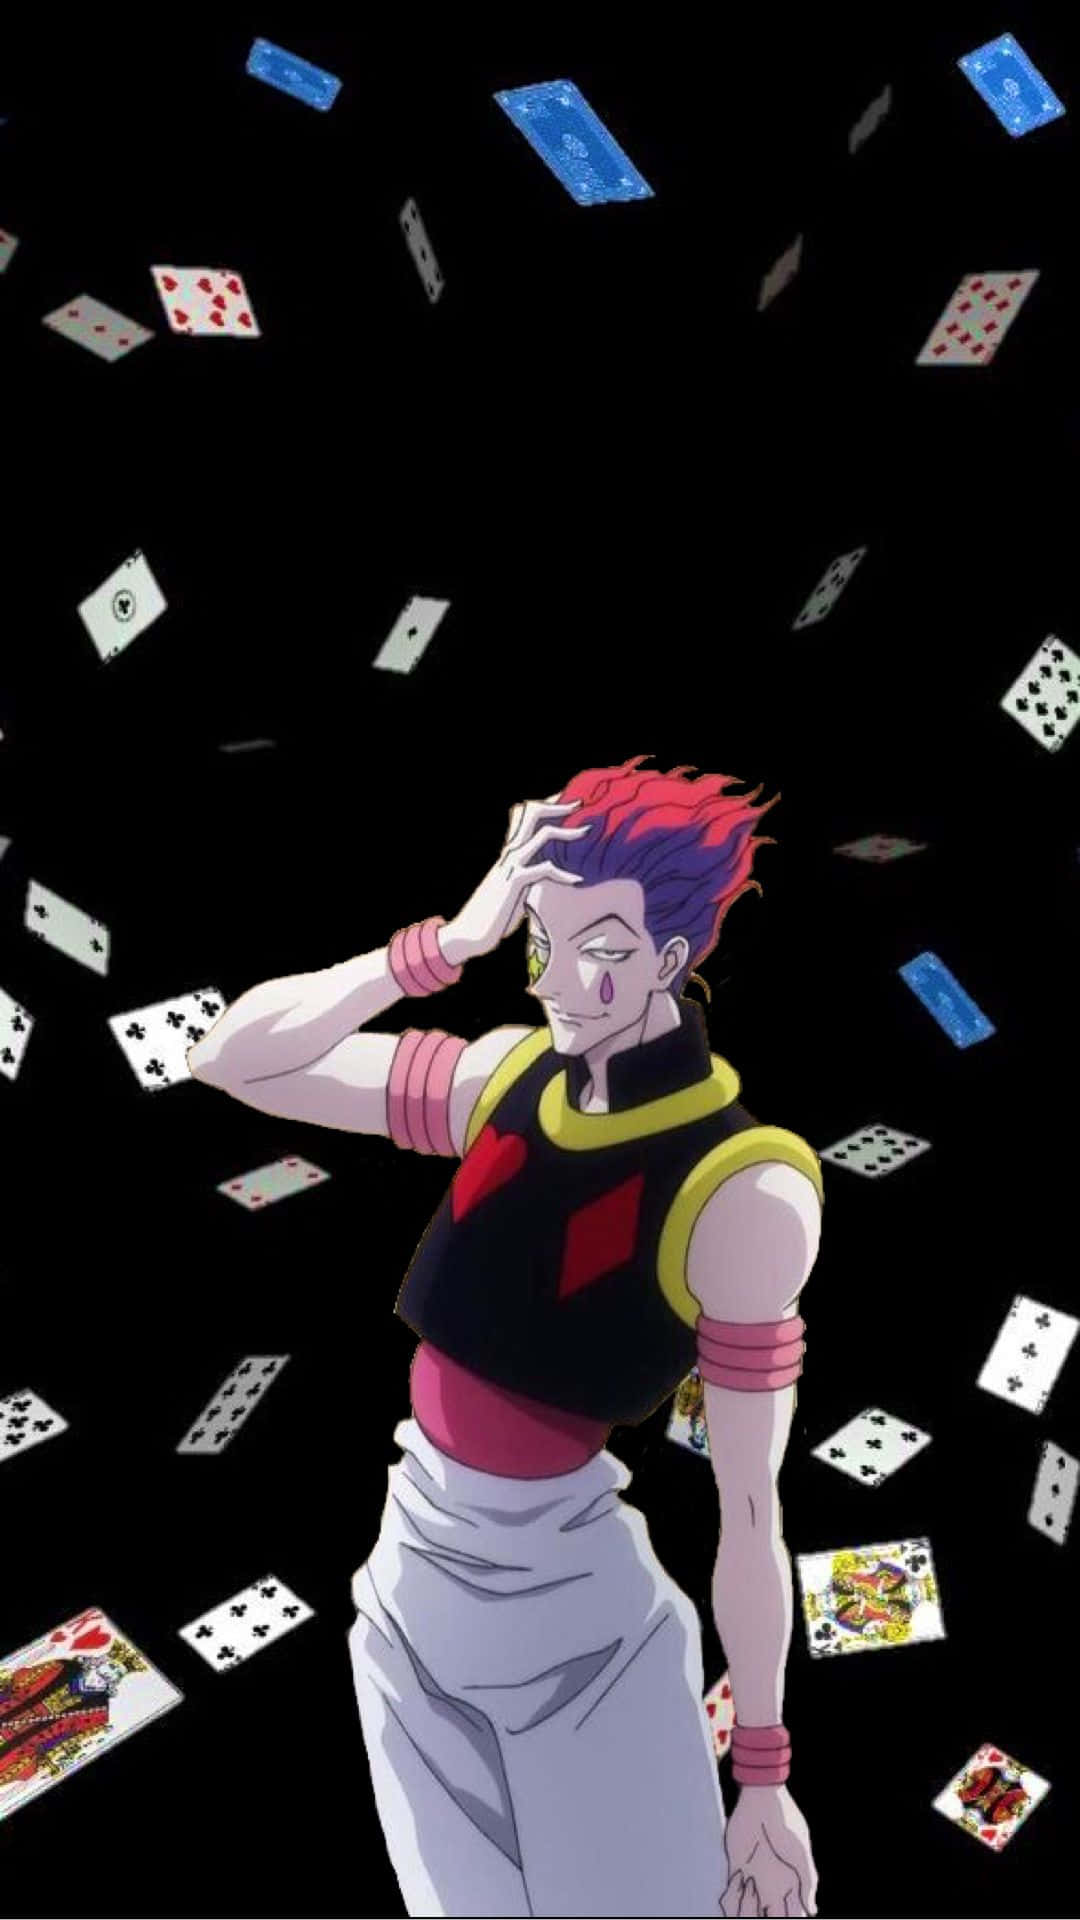 Download the best HD hisoka wallpaper fro android & iphone - HD